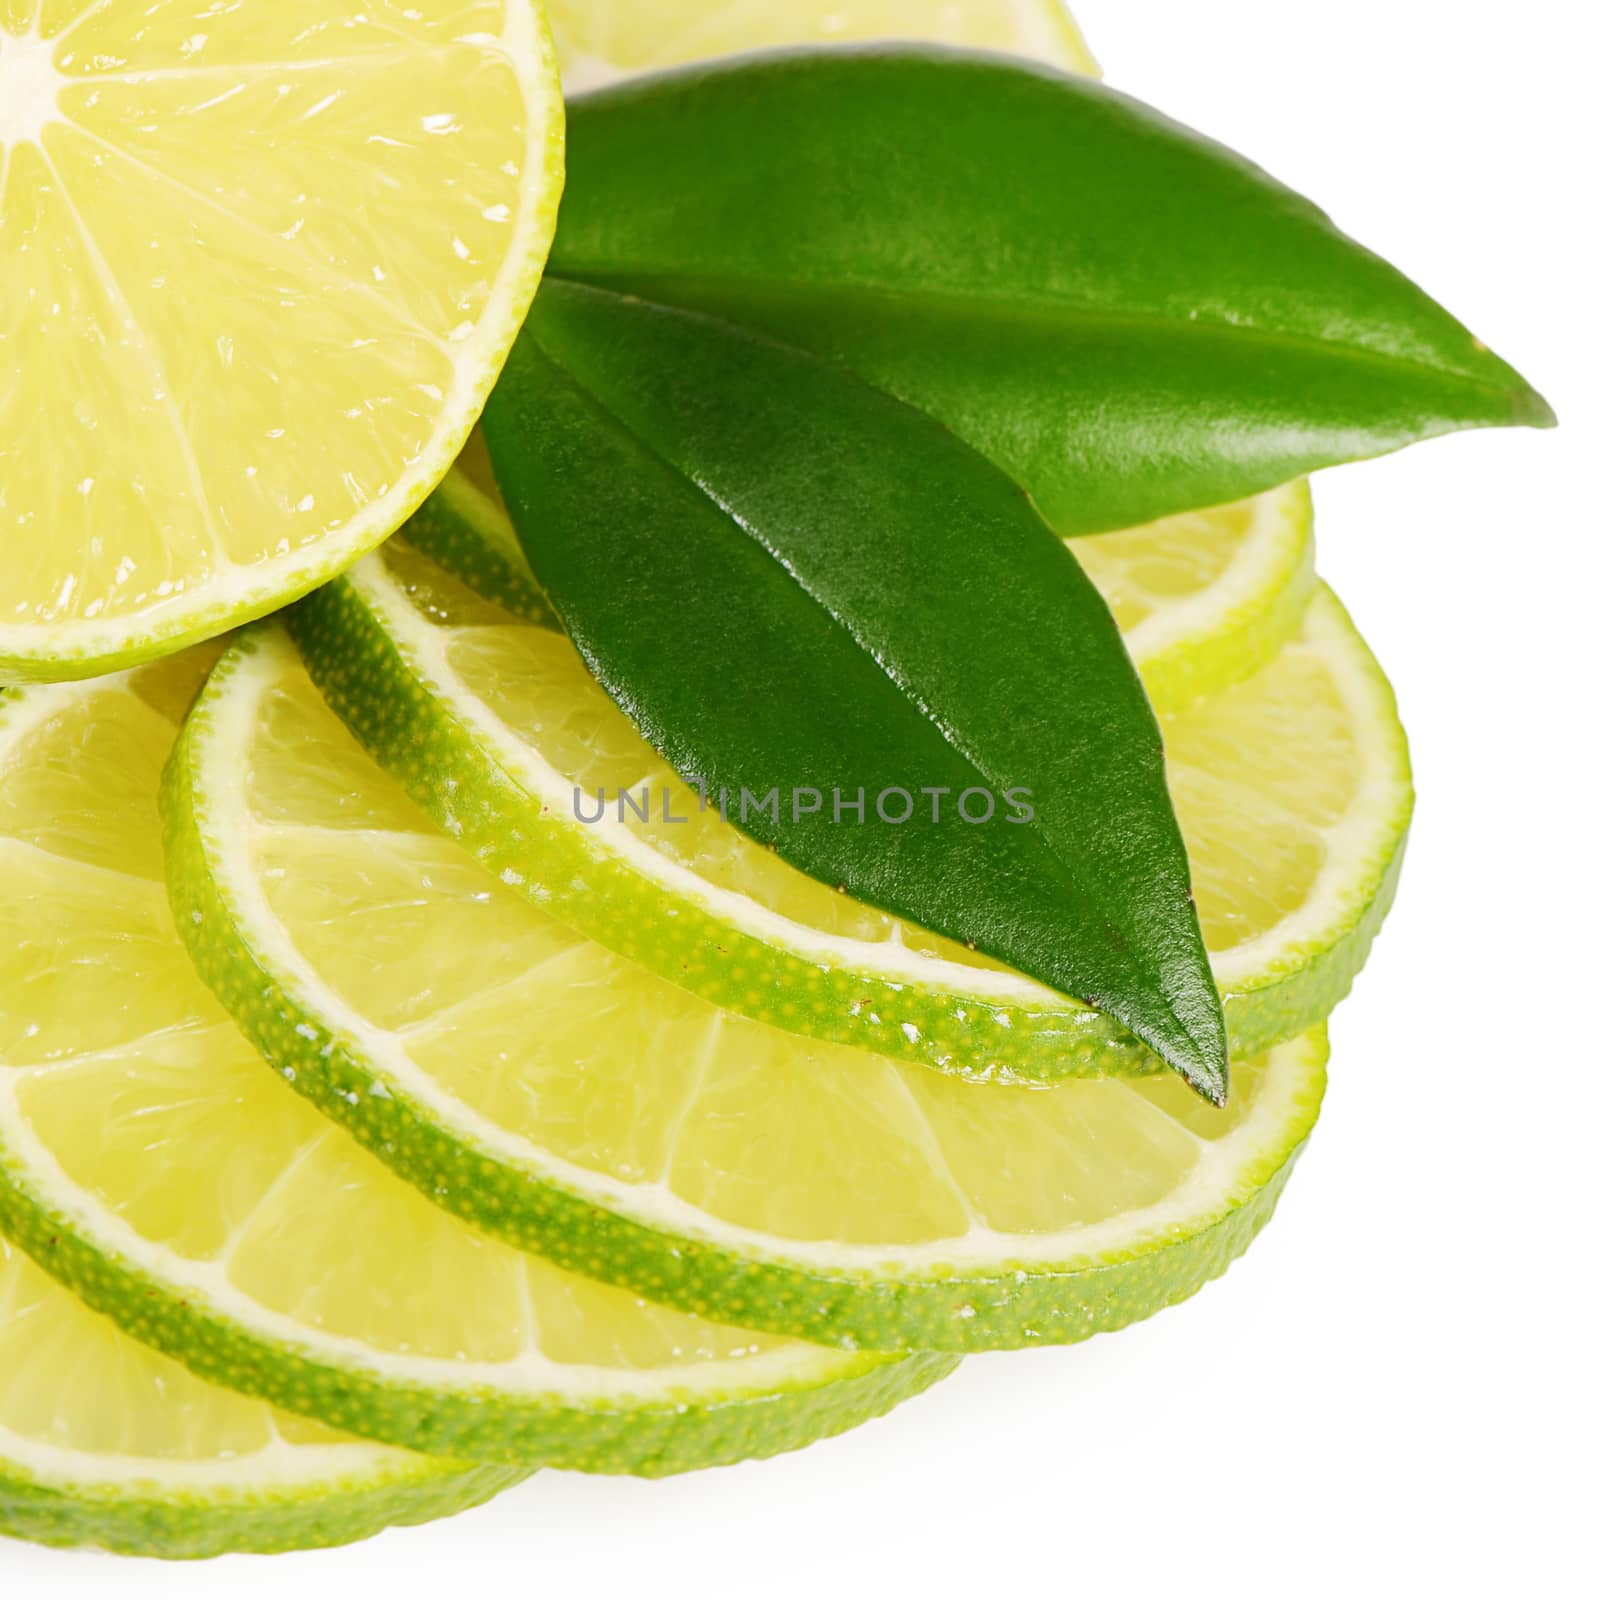 The fresh lime isolated on a white background by SvetaVo